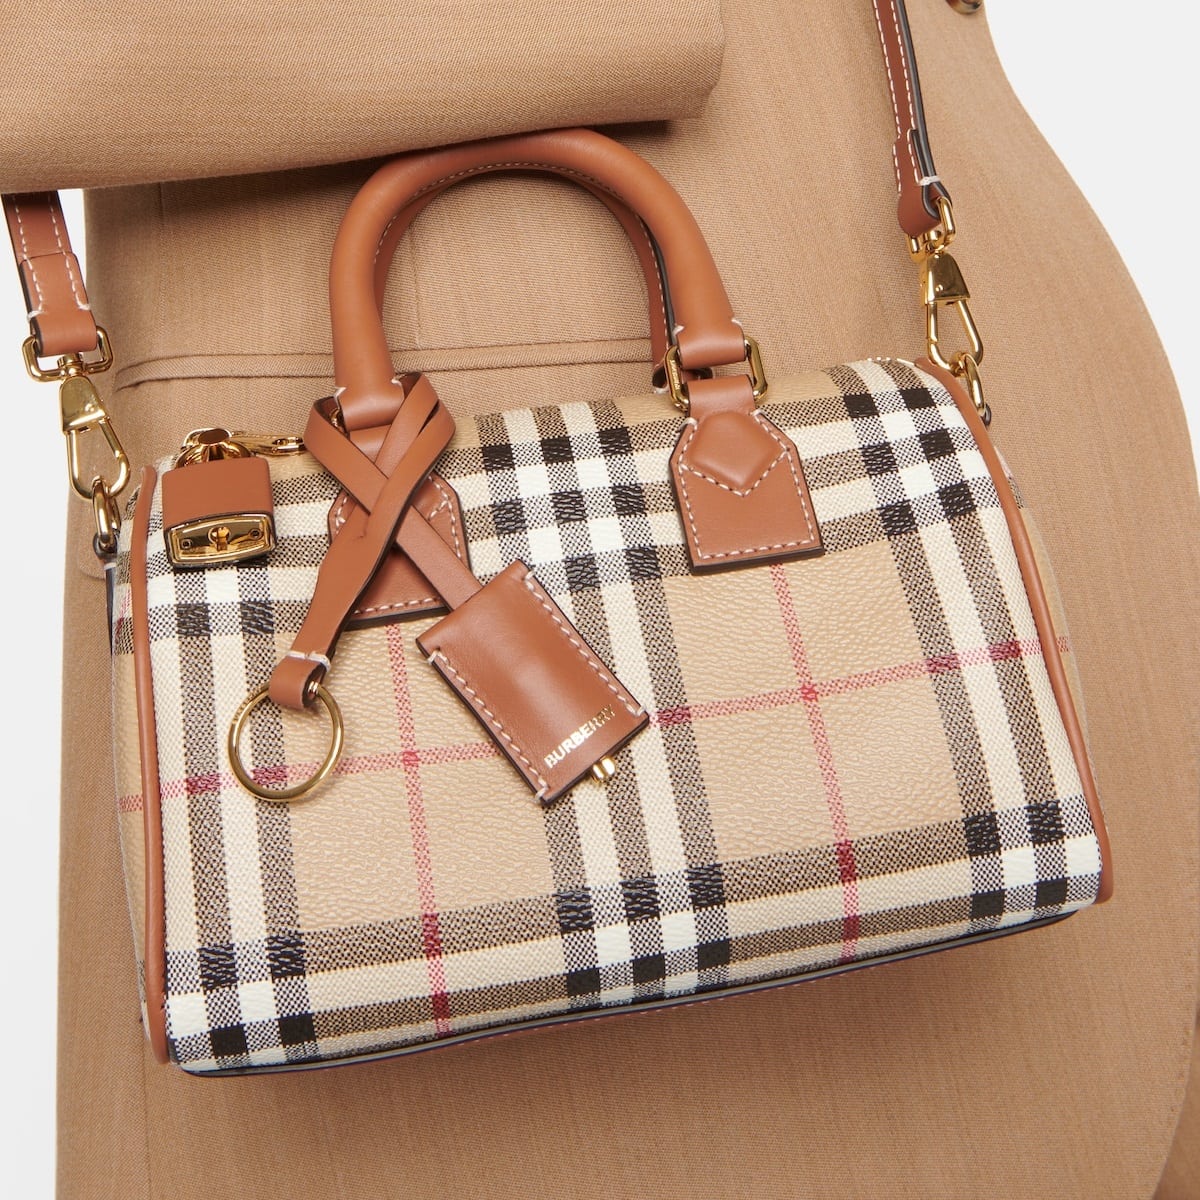 Authentic Burberry bags feature an iconic check pattern, either on the lining or exterior, that is evenly spaced and always sharp, never blurry or faded